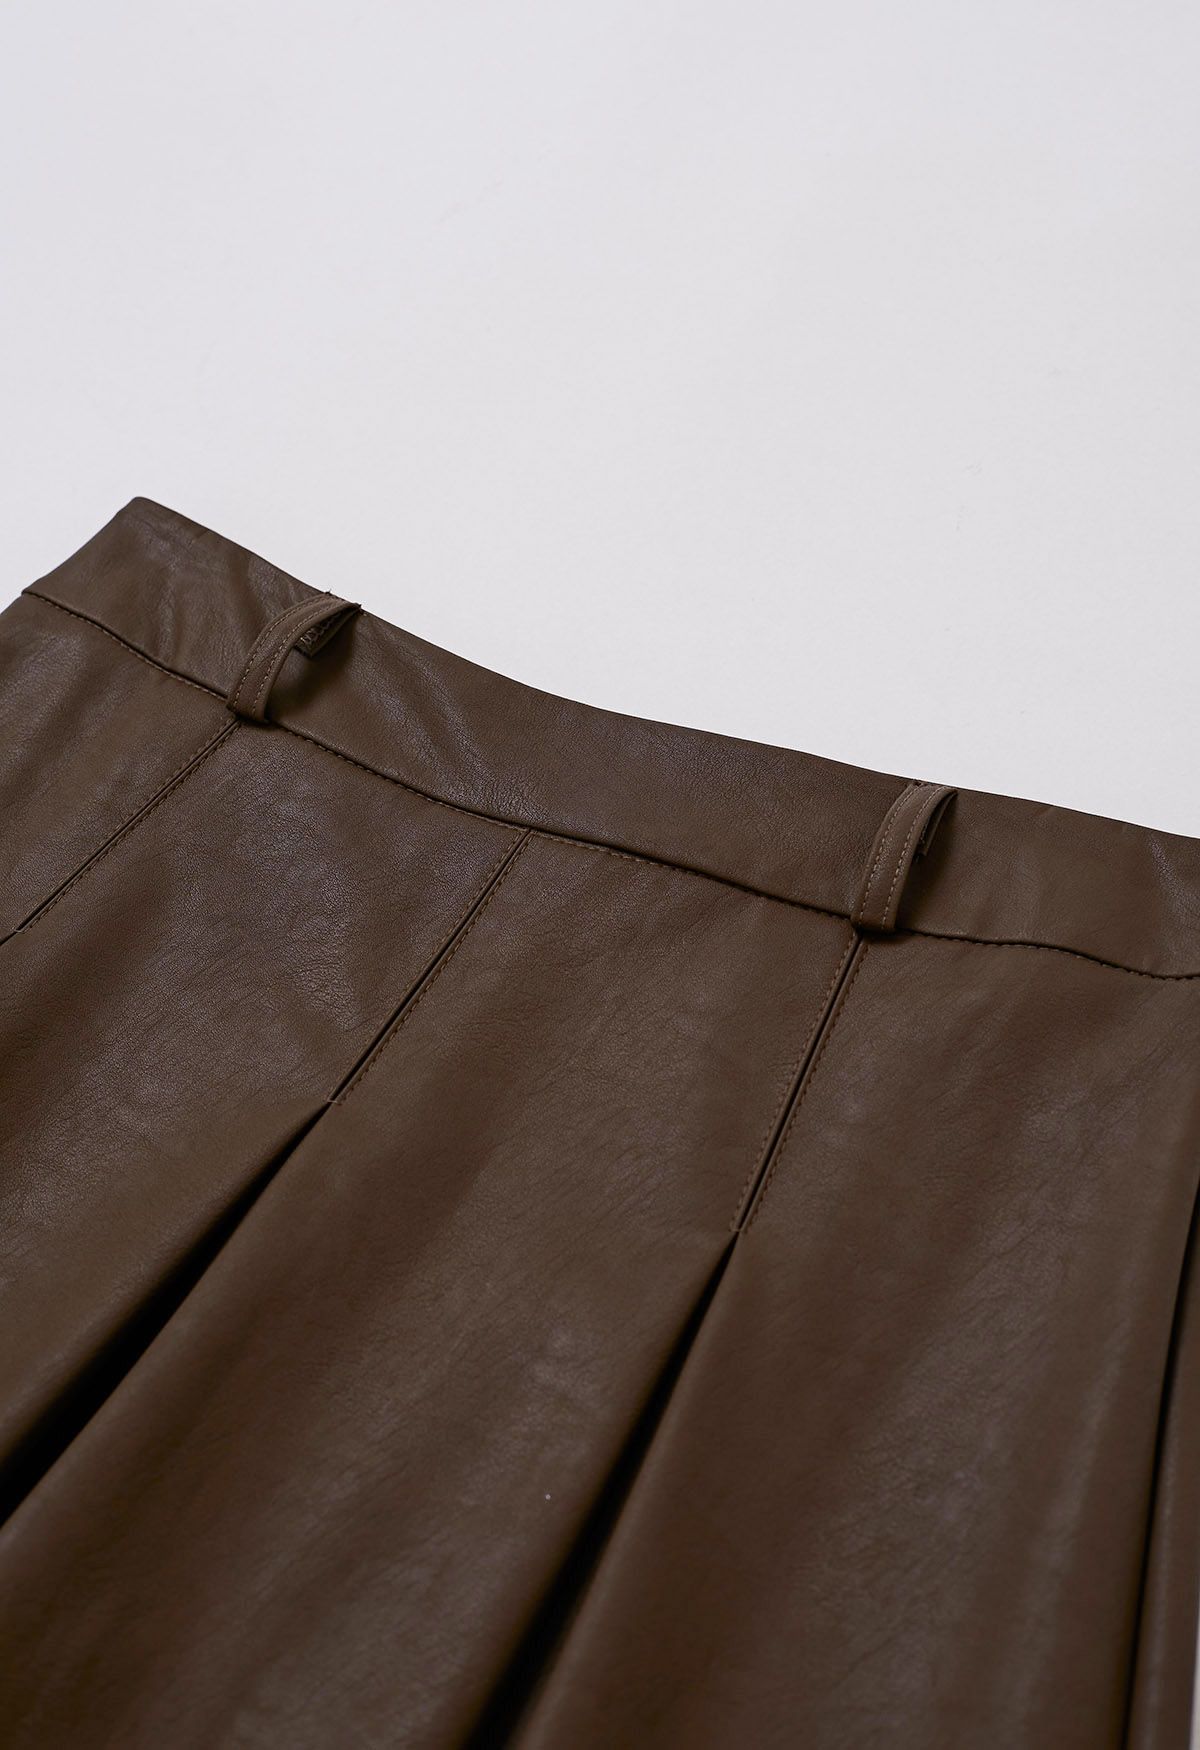 Faux Leather Pleated Belted Midi Skirt in Khaki